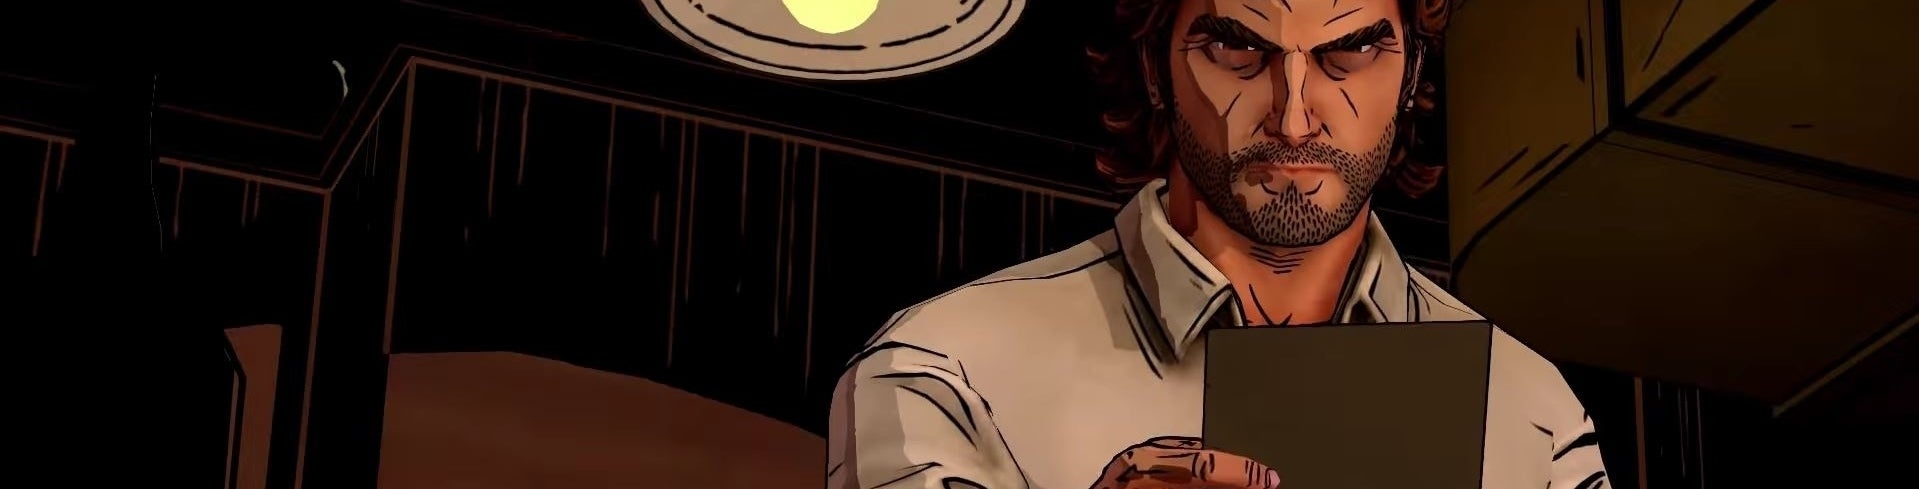 Image for The Wolf Among Us, Episode 3: A Crooked Mile review